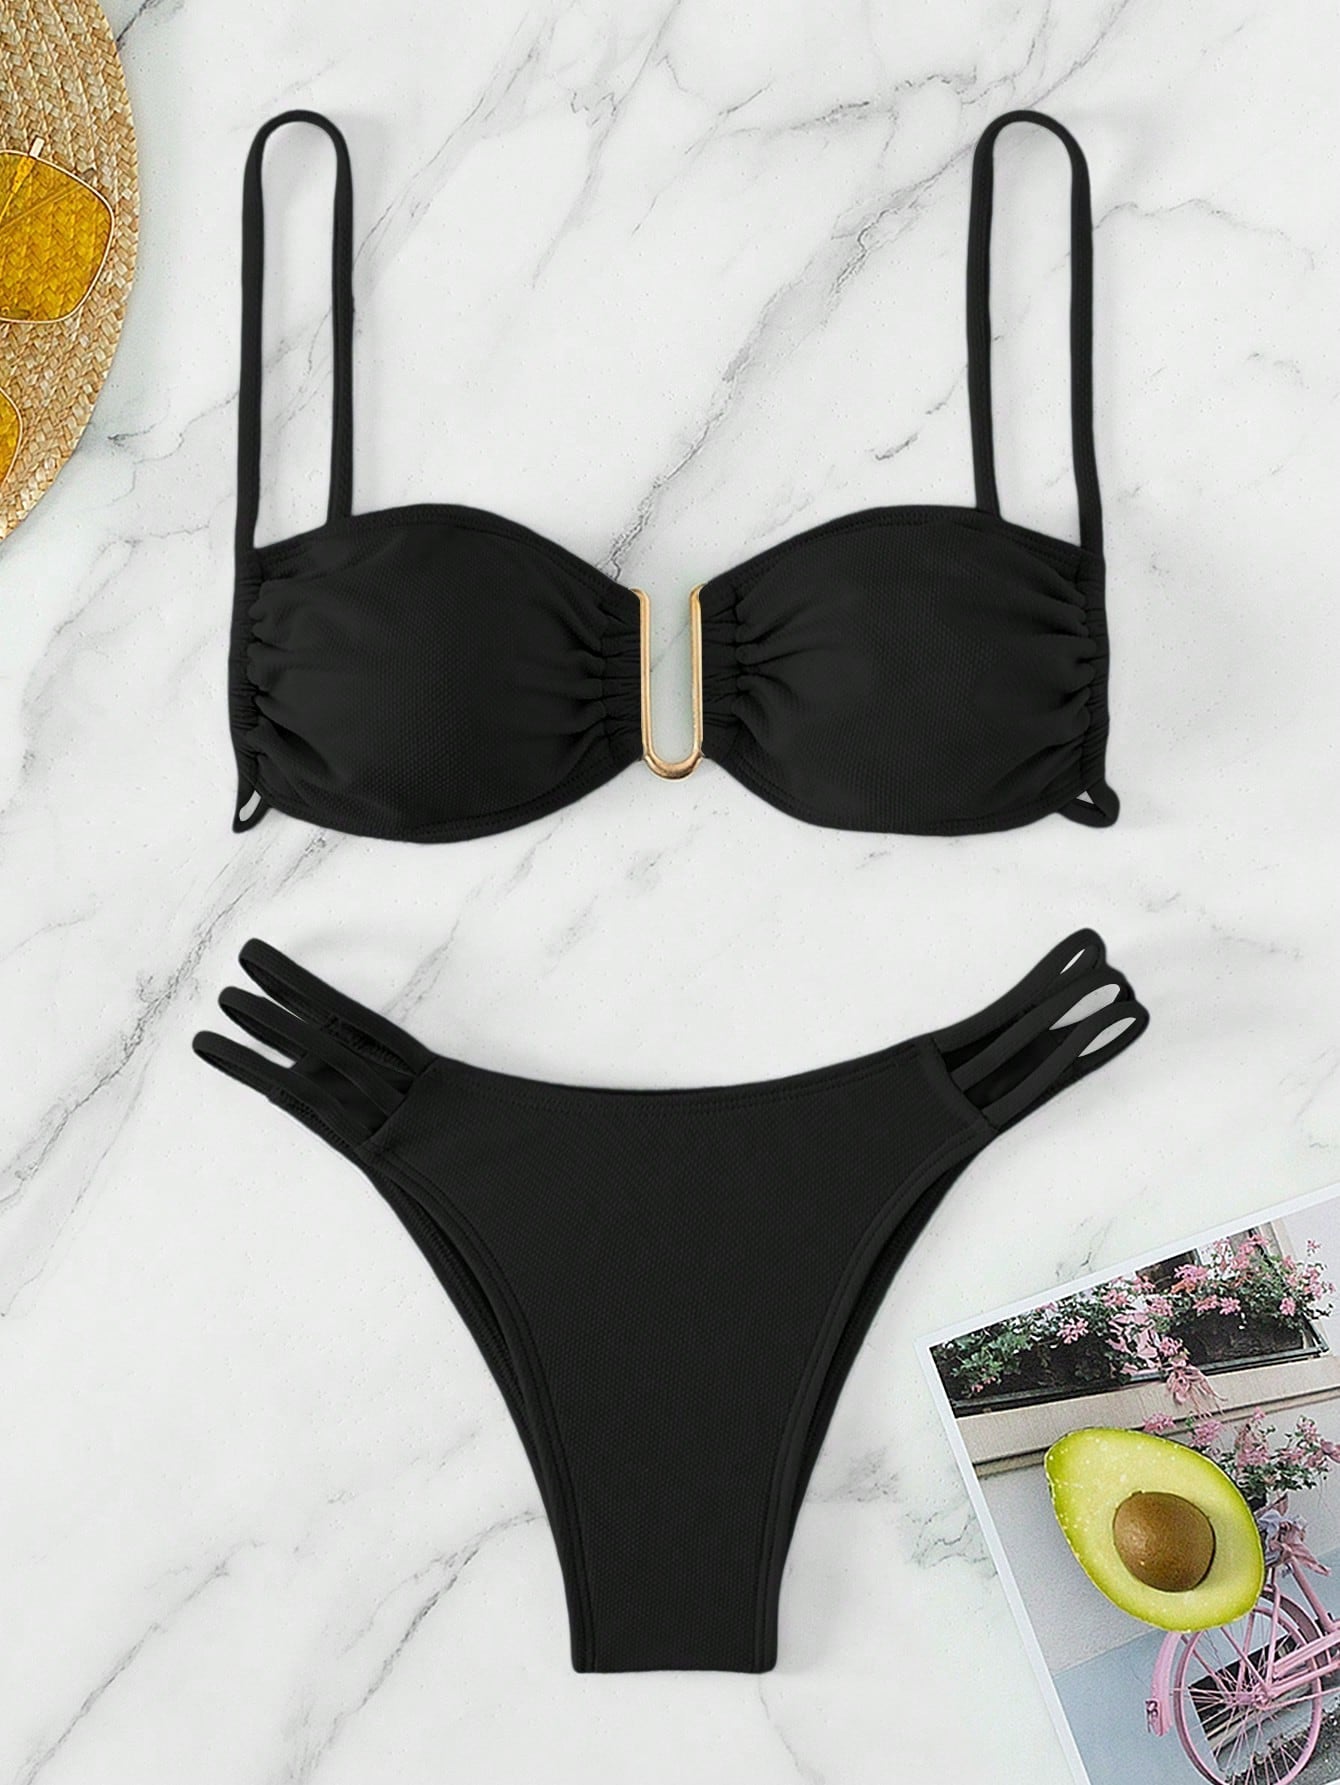 Swim Summer Beach Solid Color Bikini Set With Metal U - Shaped Buckle Decoration And Hollow Out Details Carnival - Negative Apparel